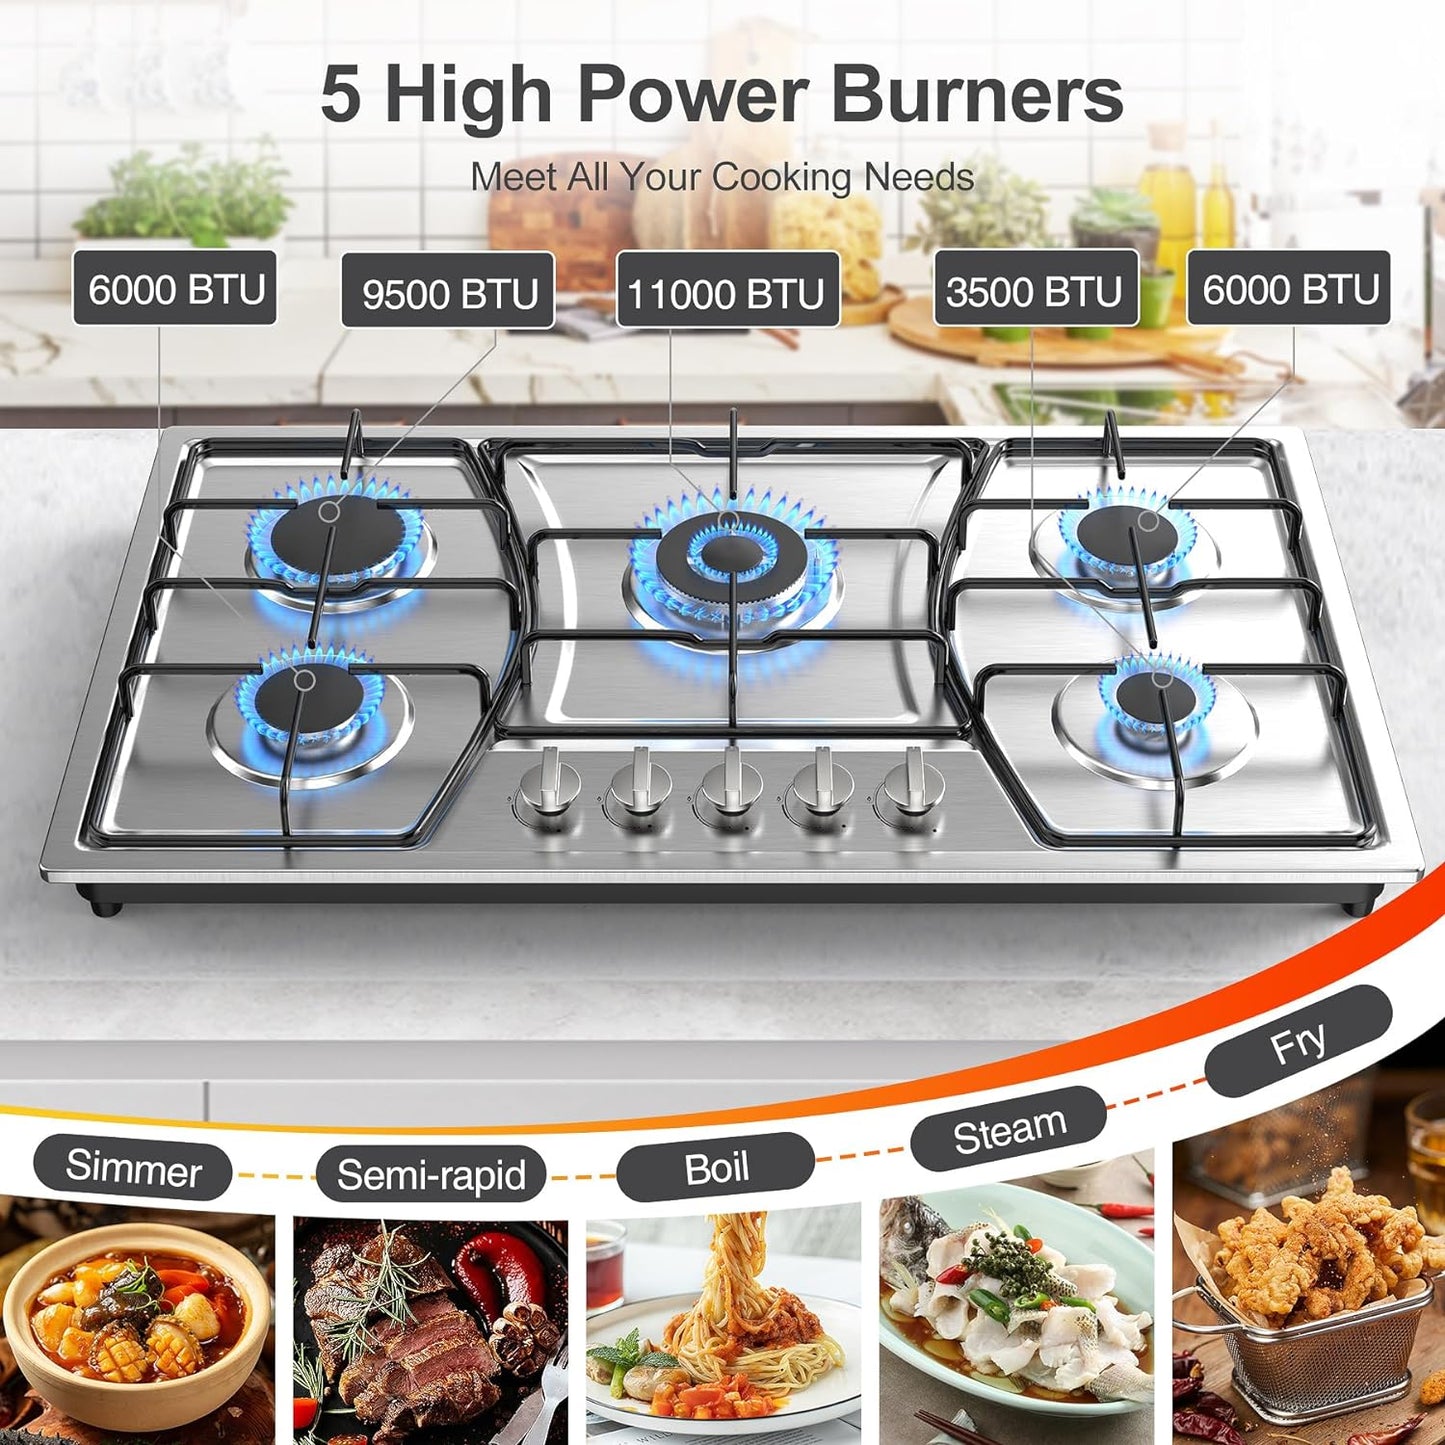 GIHETKUT Gas Cooktop 5 Burners, 35Inch Gas Stove Top Stainless Steel, Built-in Gas Propane Cooktops with Thermocouple Protection, NG/LPG Convertible, Electronic Ignition Gas Hob for Kitc